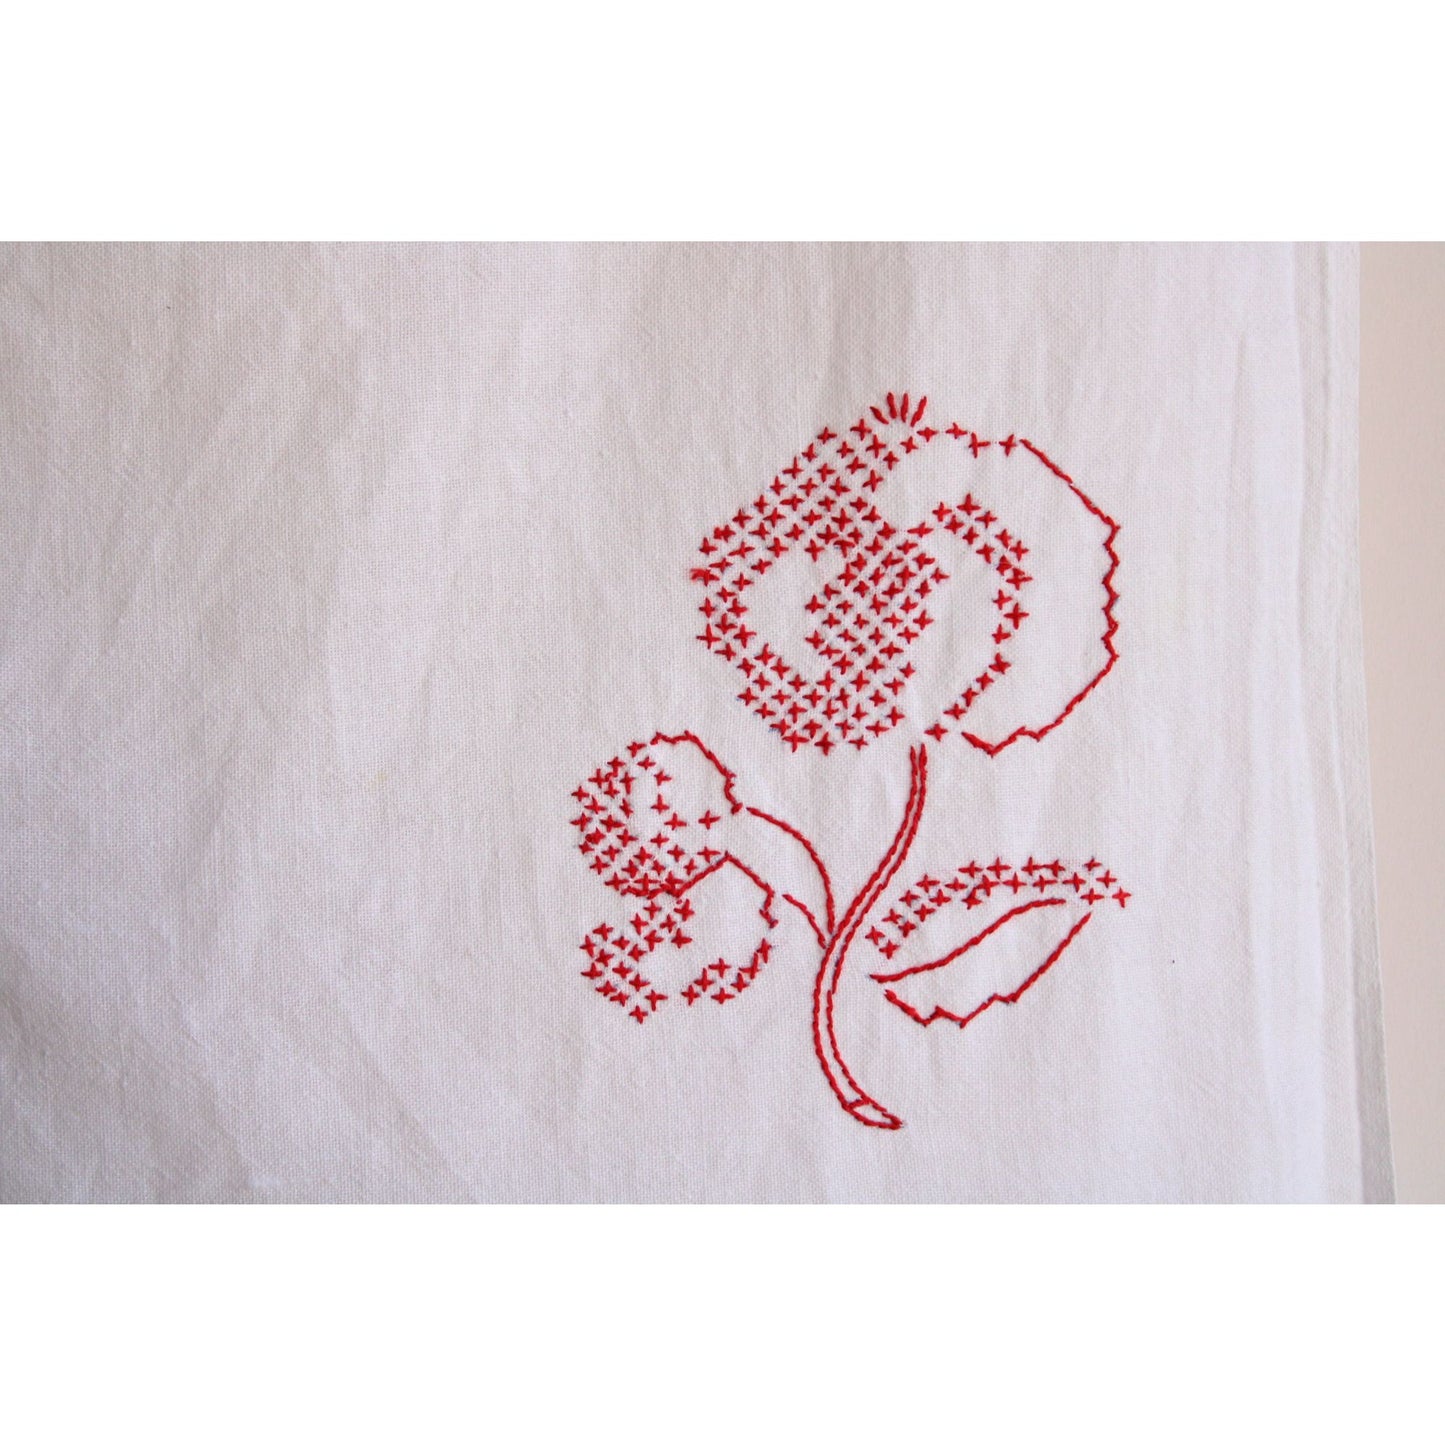 Vintage 1960s Tablecloth Or Kitchen Towel with Red Flower Cross Stitch